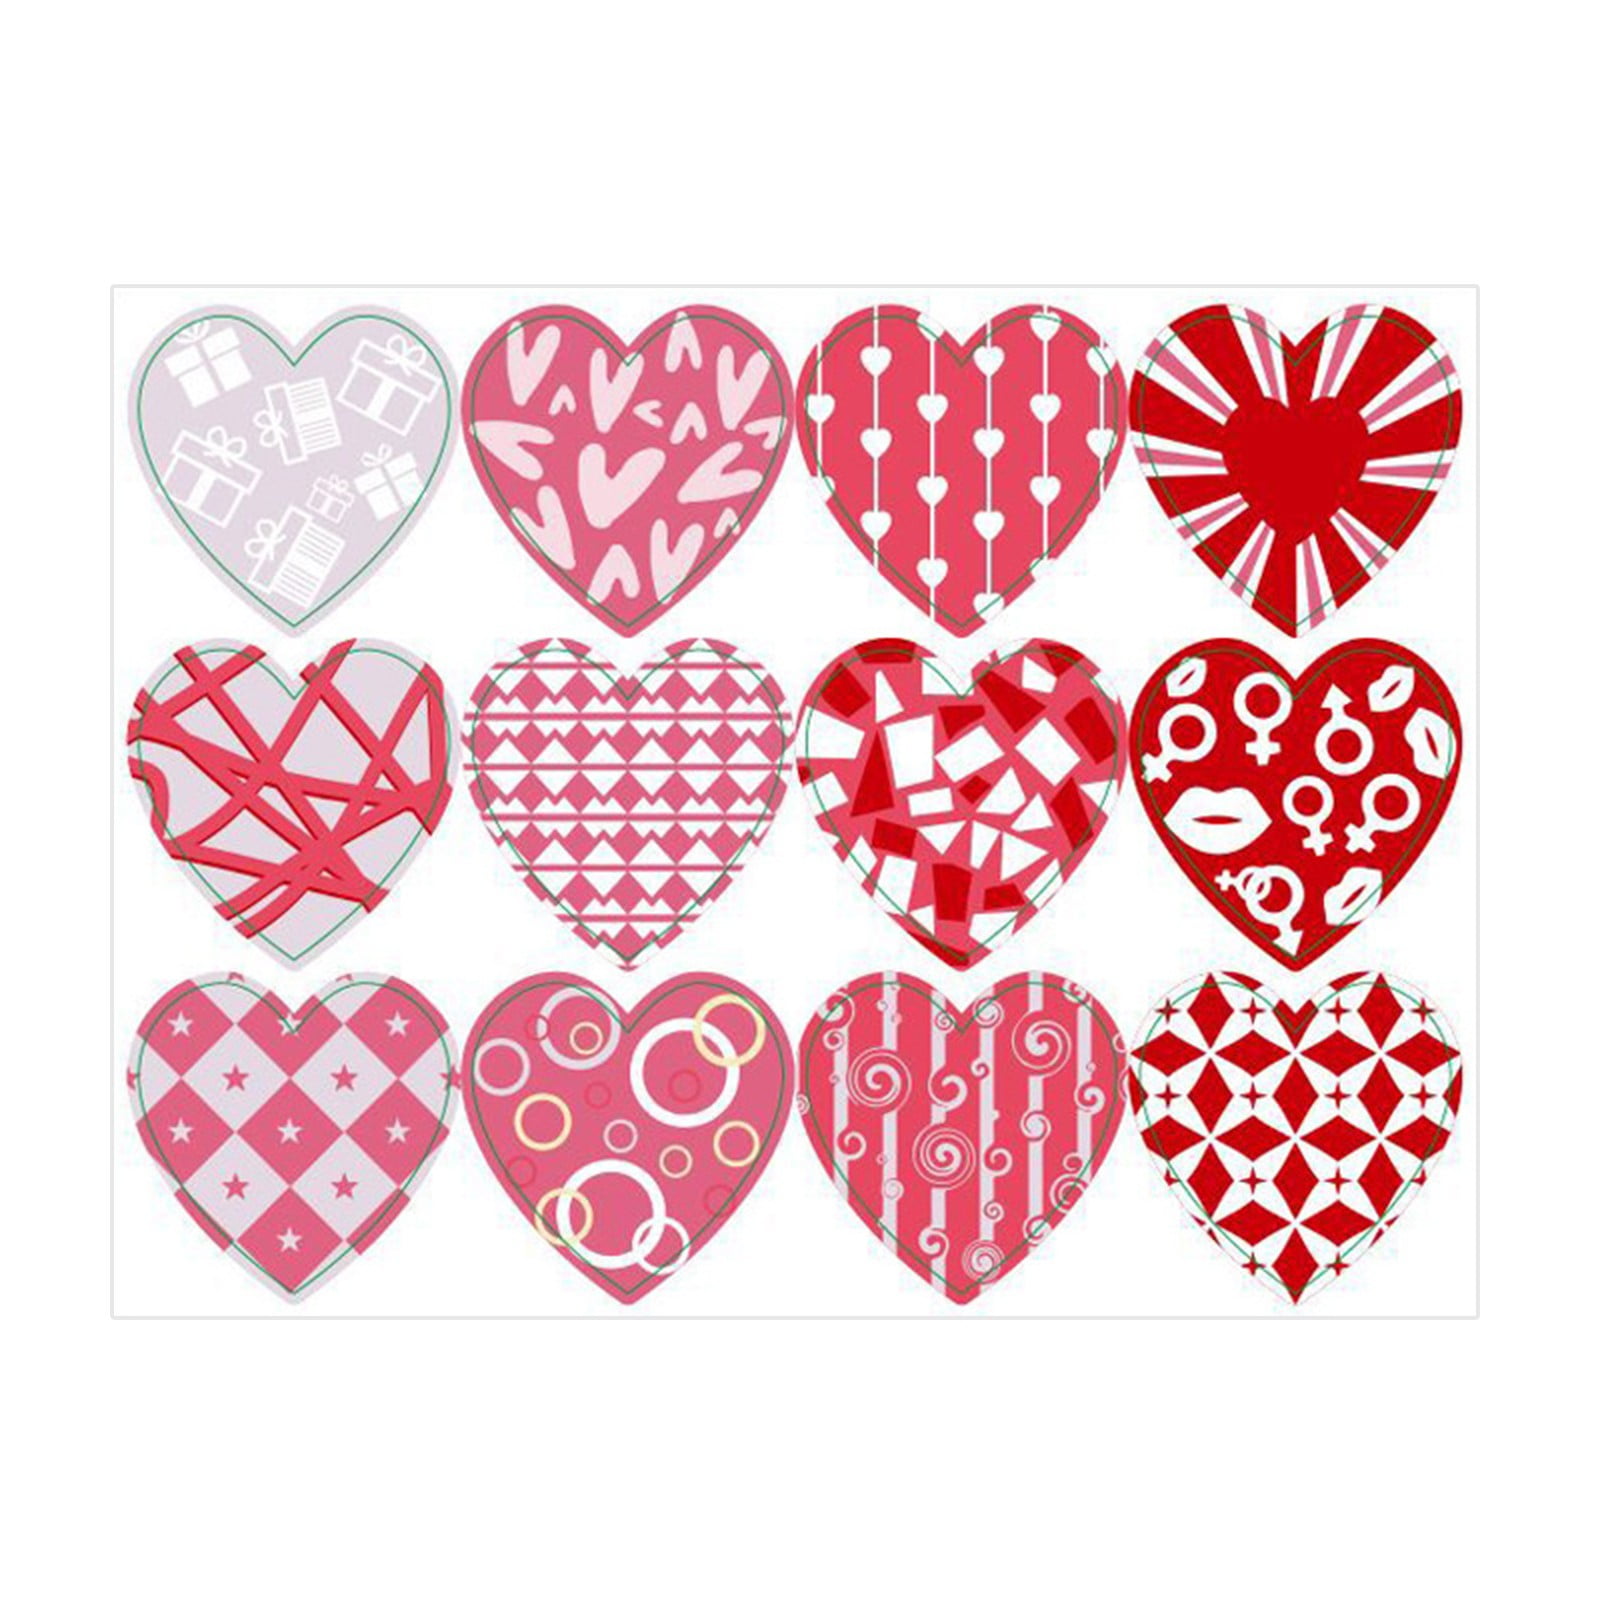 Dream Loom Valentines Heart Stickers 60 Sheets Valentine's Day Love Decorative Stickers for Anniversaries Party Wedding (Colorful)